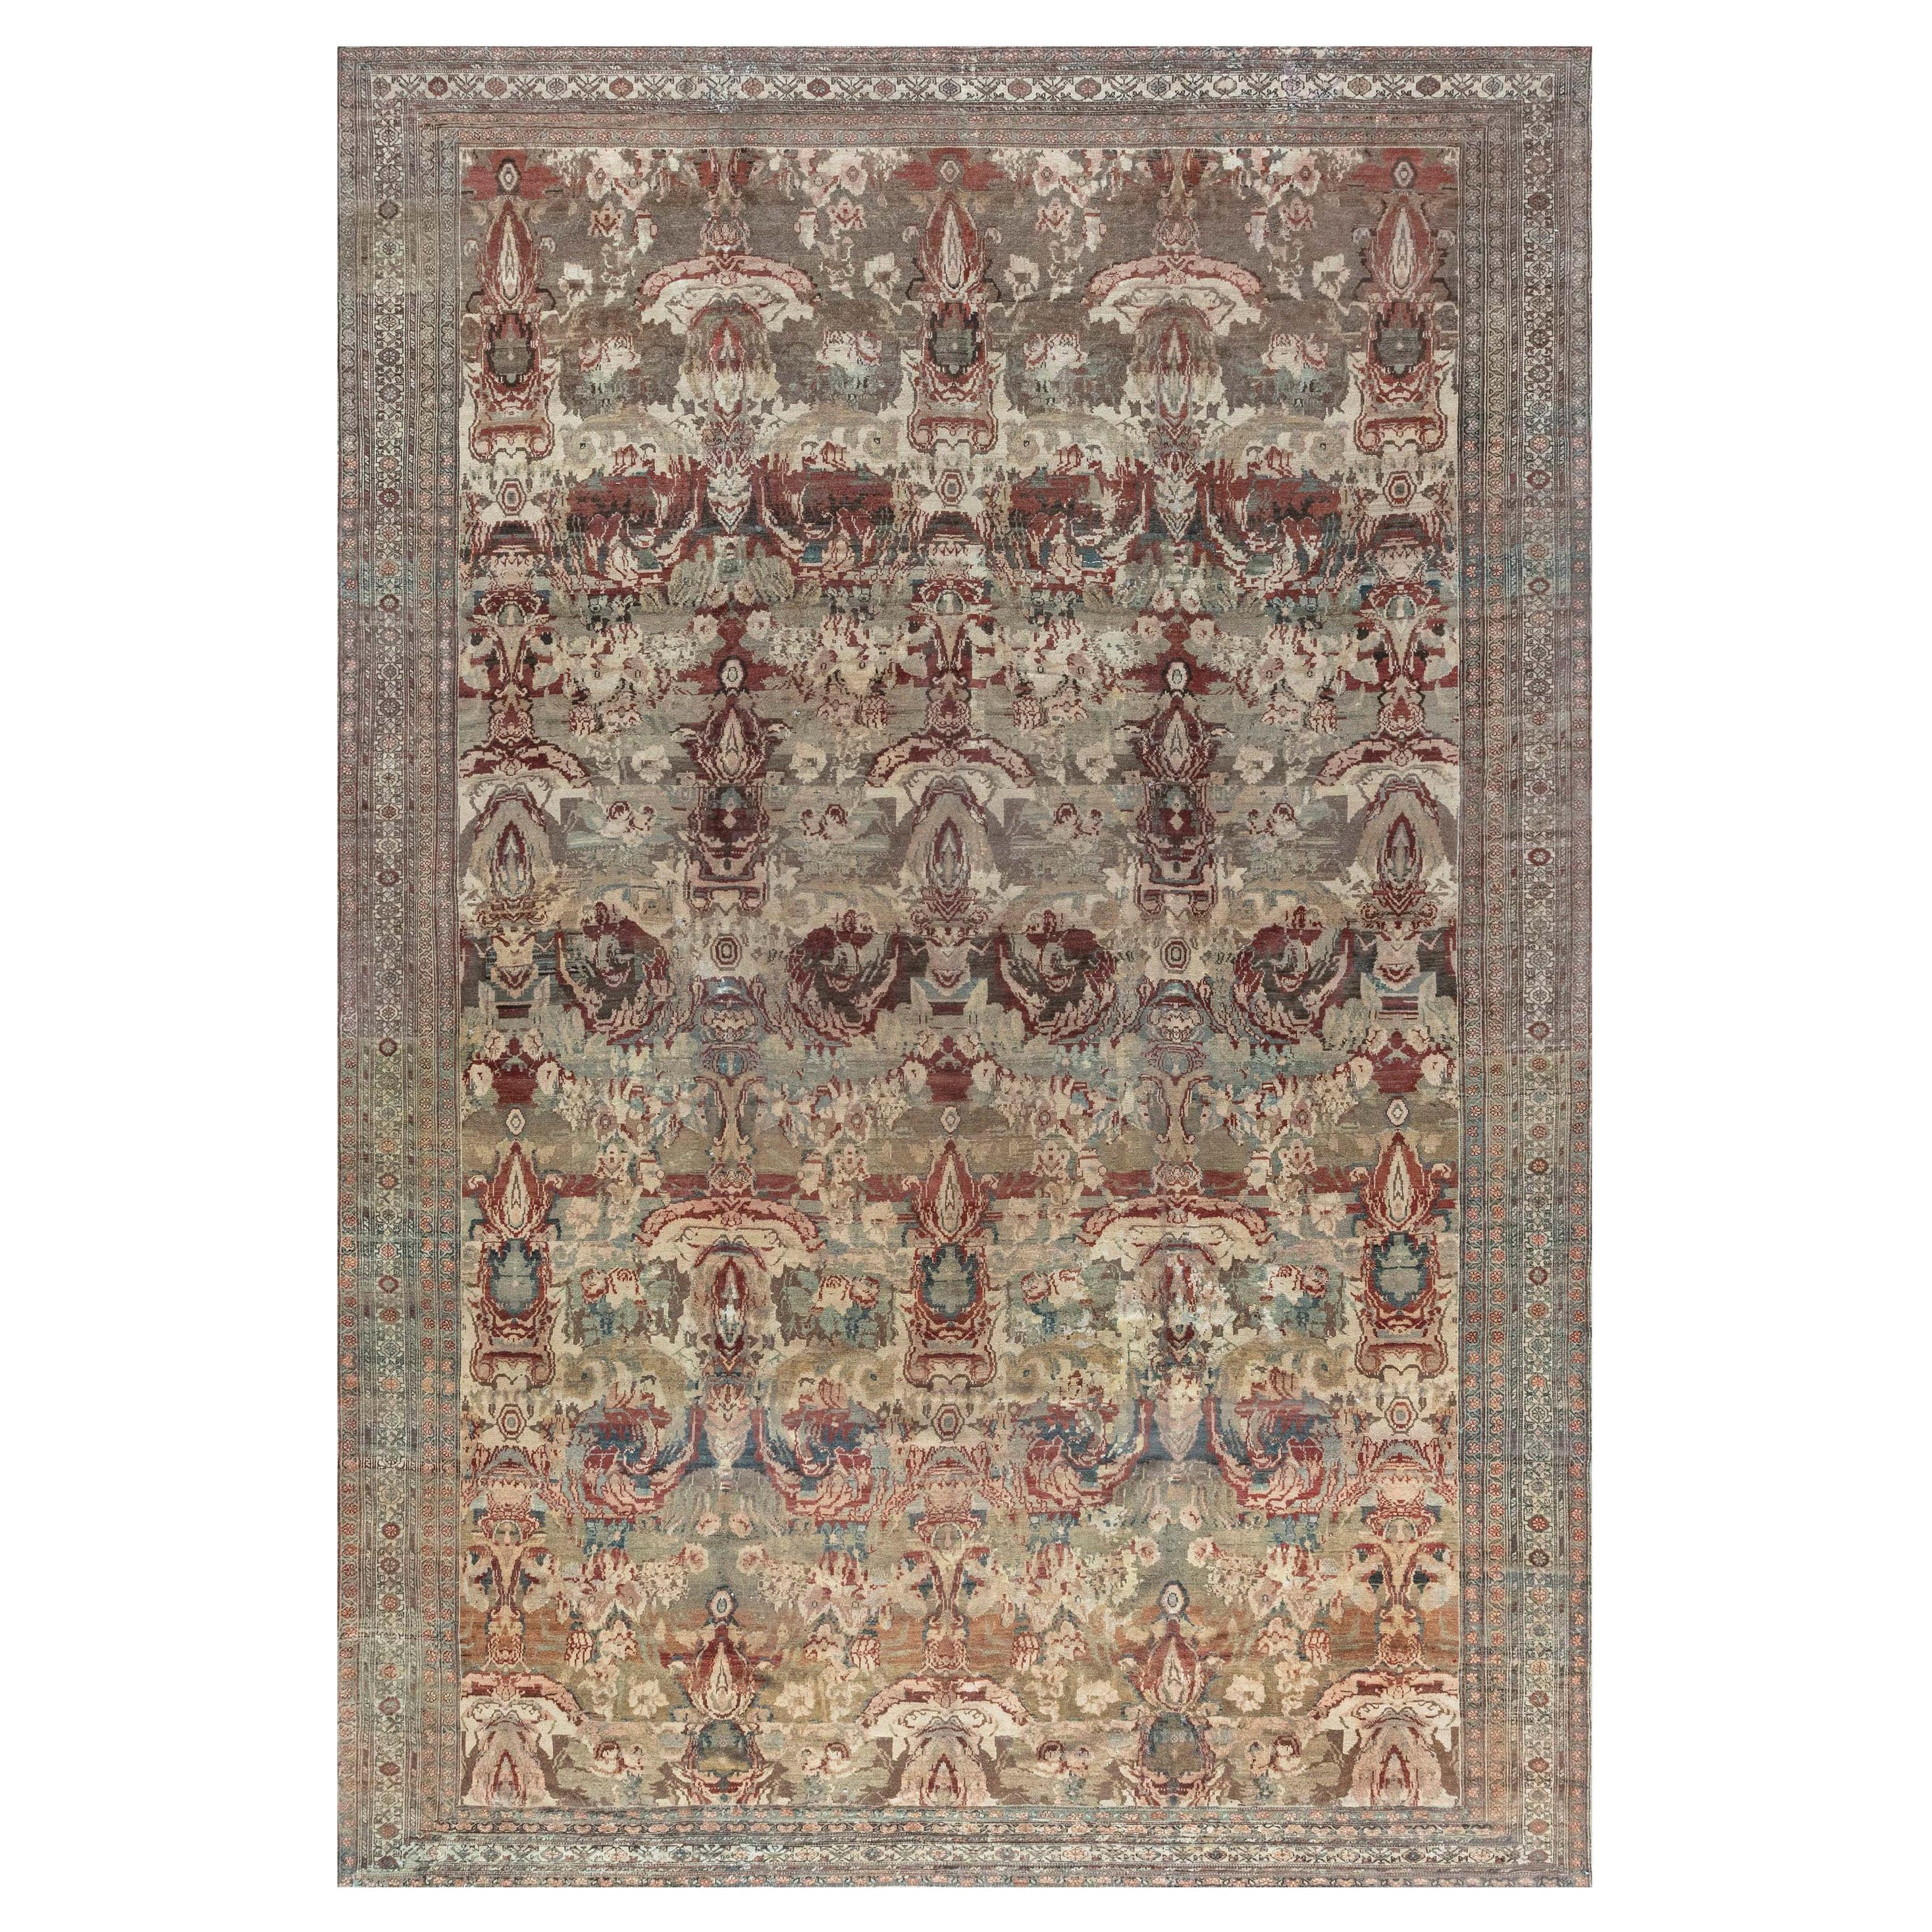 Authentic 19th Century Persian Malayer Rug